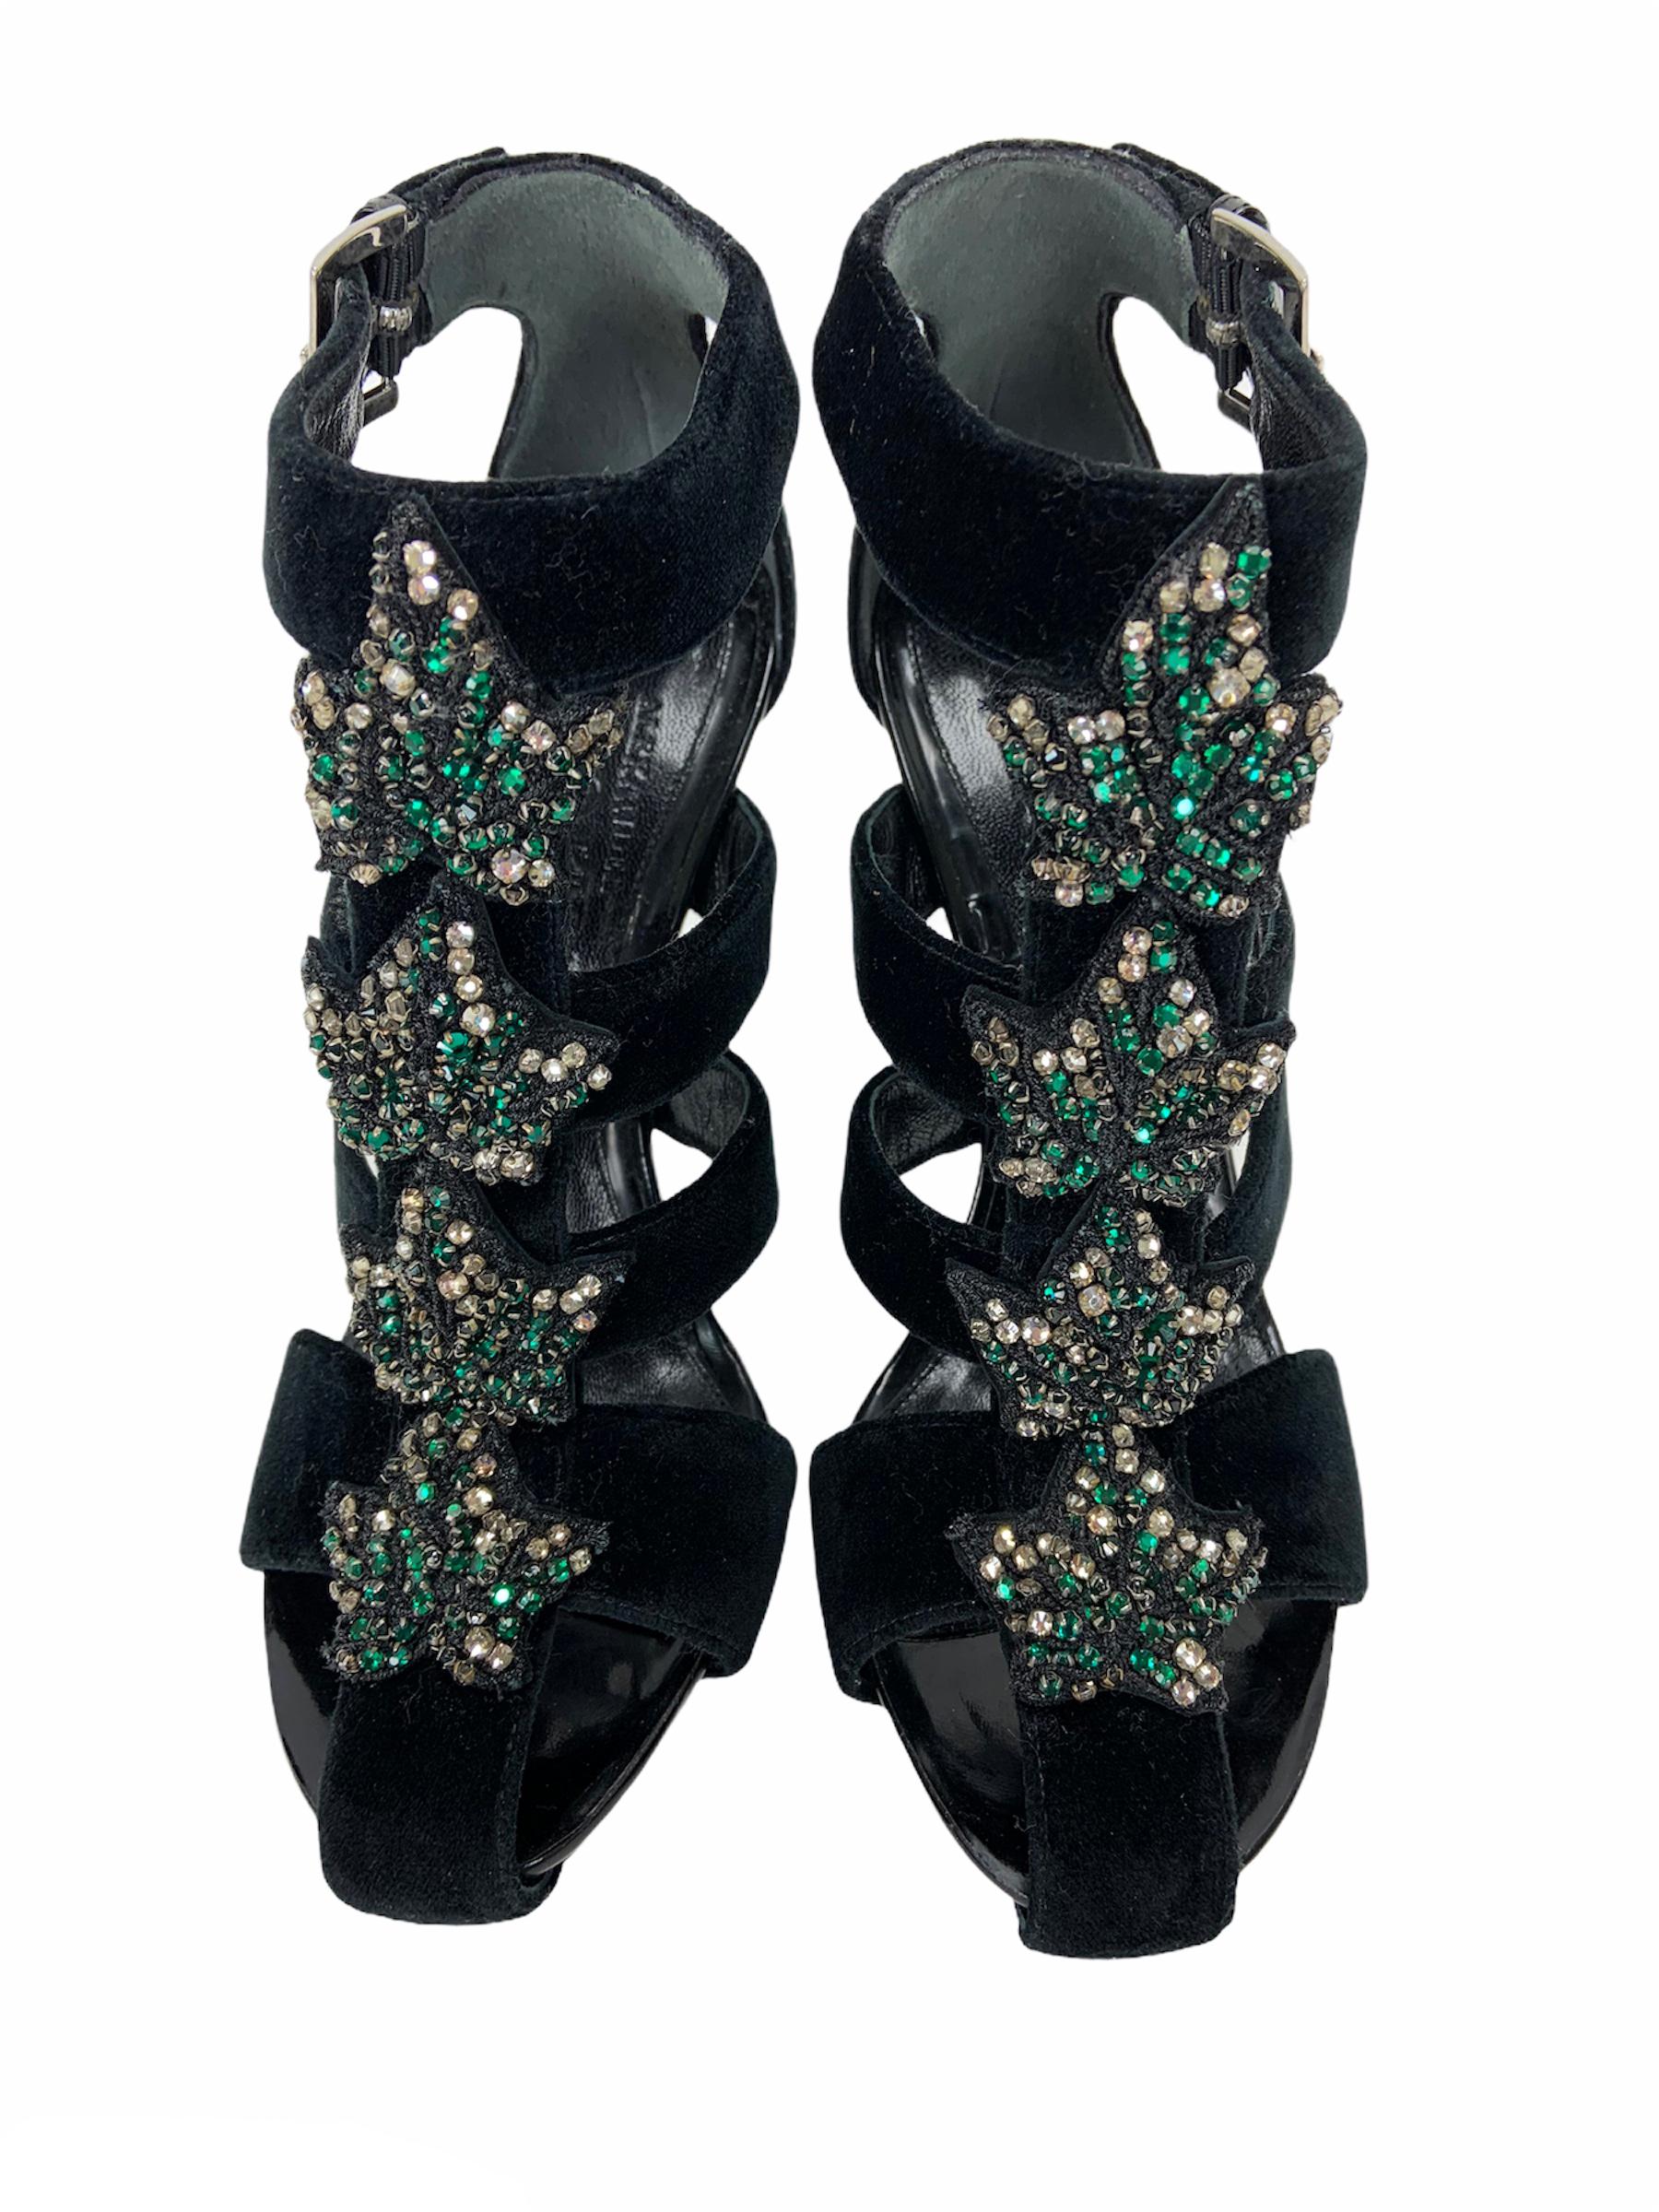 New Alexander McQueen Black Velvet Crystal Embellished Ivy Cage Sandals 37.5  In New Condition For Sale In Montgomery, TX